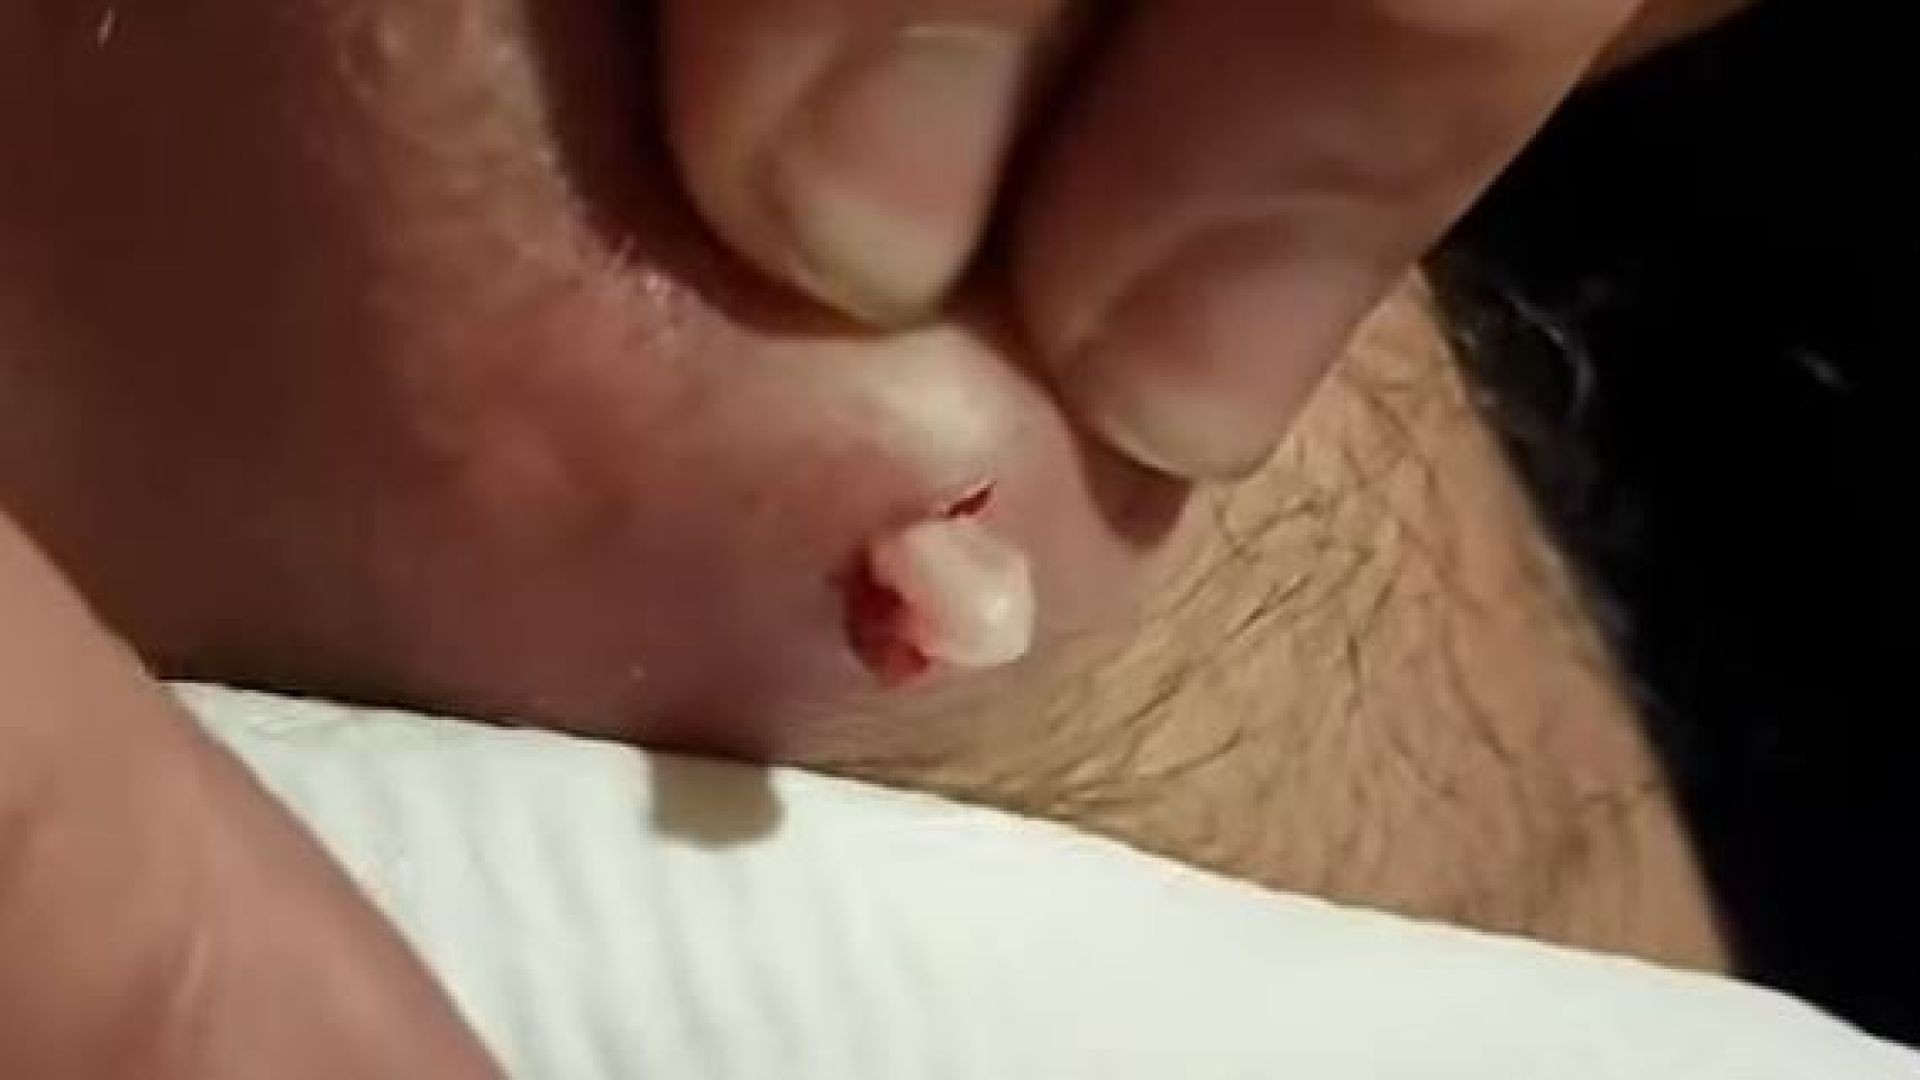 Lumpy Cyst of Knee Popping - Explosive !!